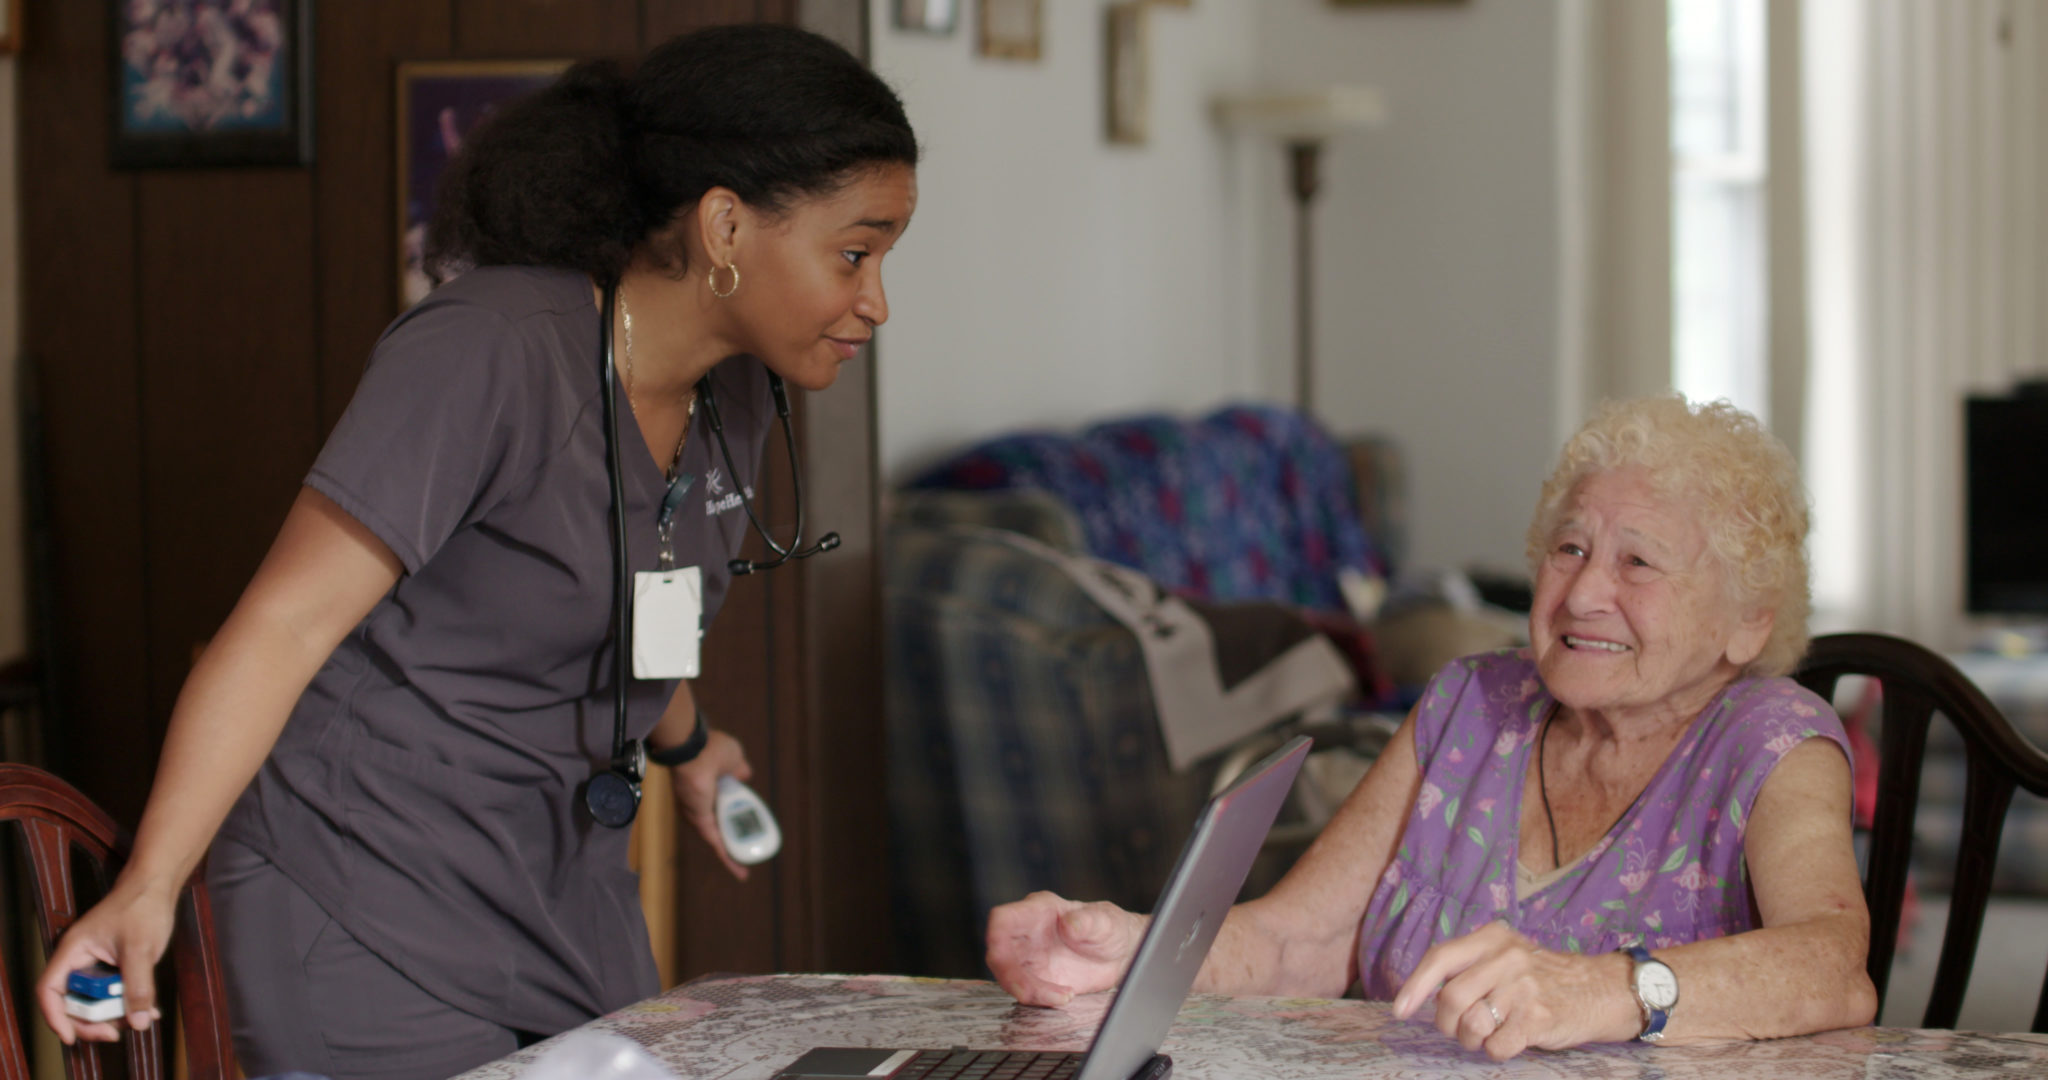 Home care nurse chatting with patient at the table